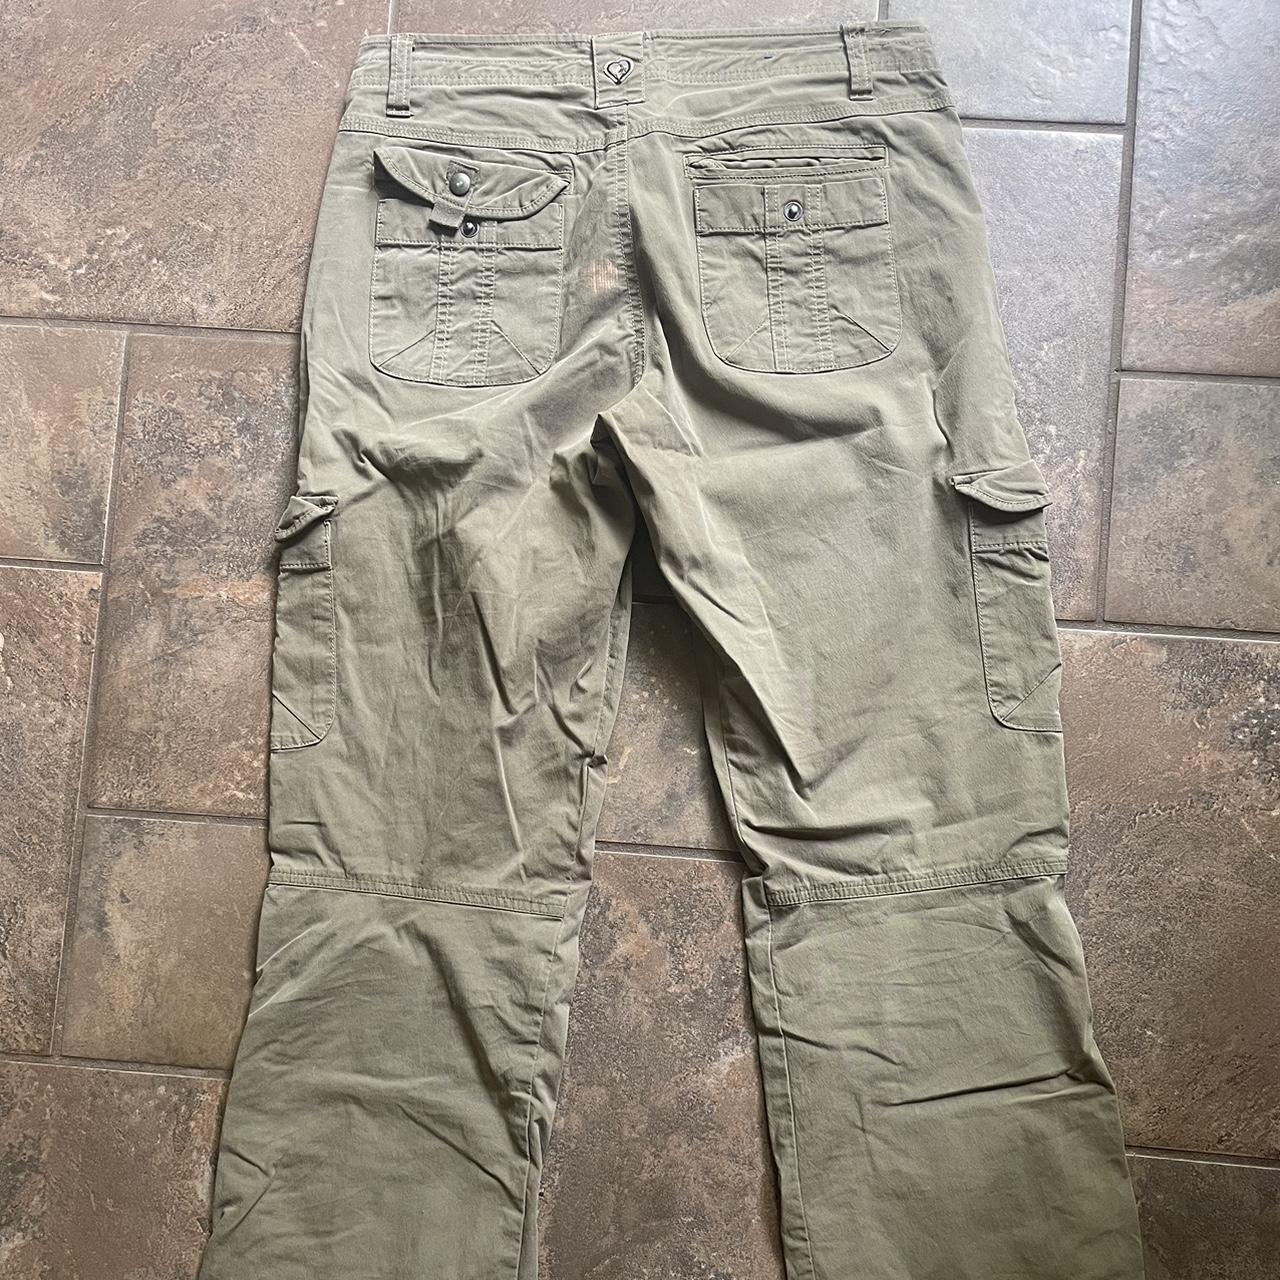 These Kühl cargo hiking pants are great for the